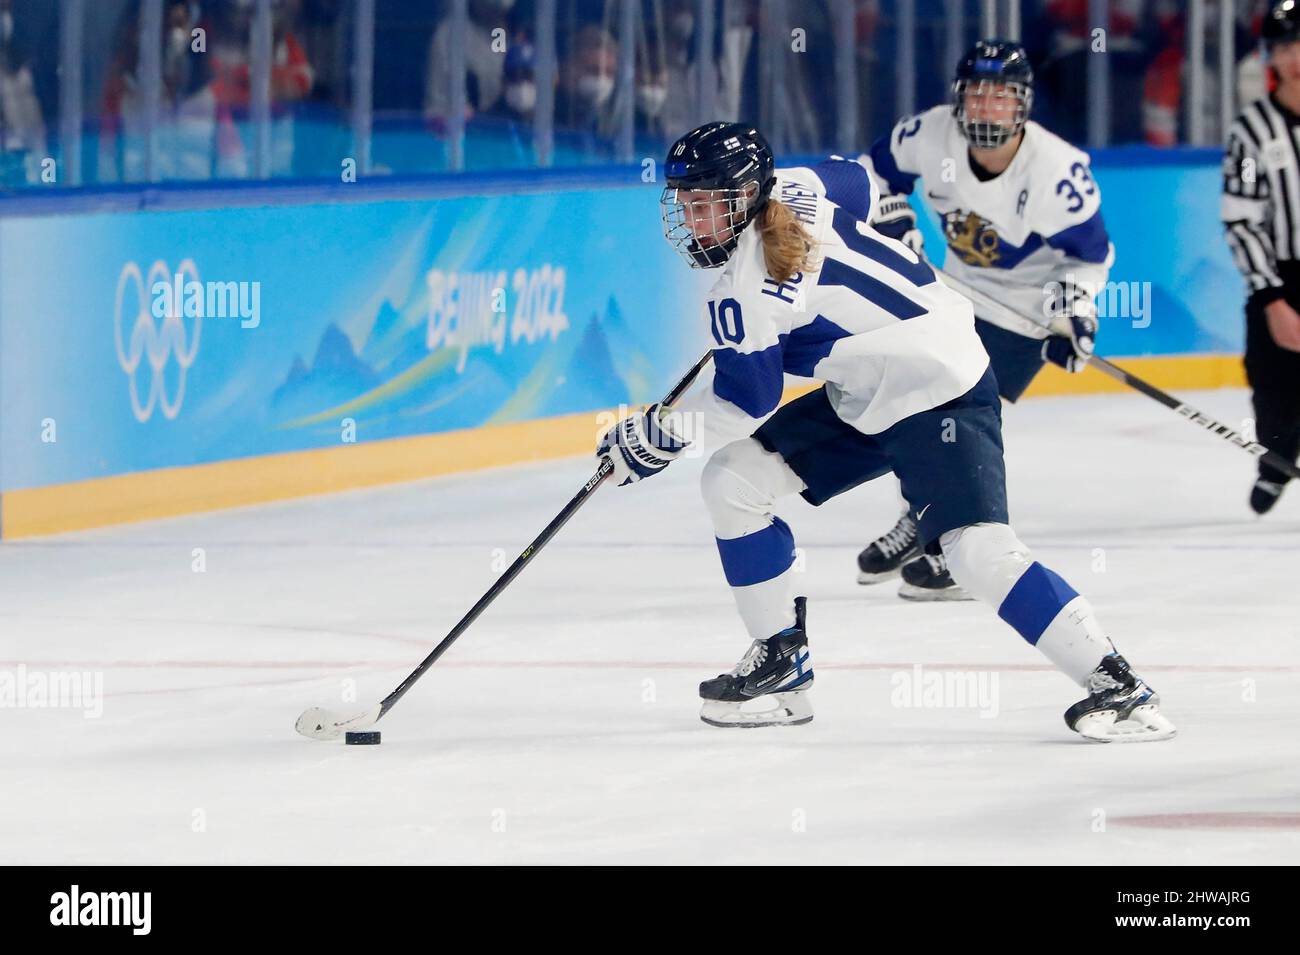 Beijing, Hebei, China. 14th Feb, 2022. Team Finland forward Elisa  Holopainen (10) in the women's ice hockey semifinal of the Beijing 2022  Olympic Winter Games at Wukesong Sports Centre. (Credit Image: ©